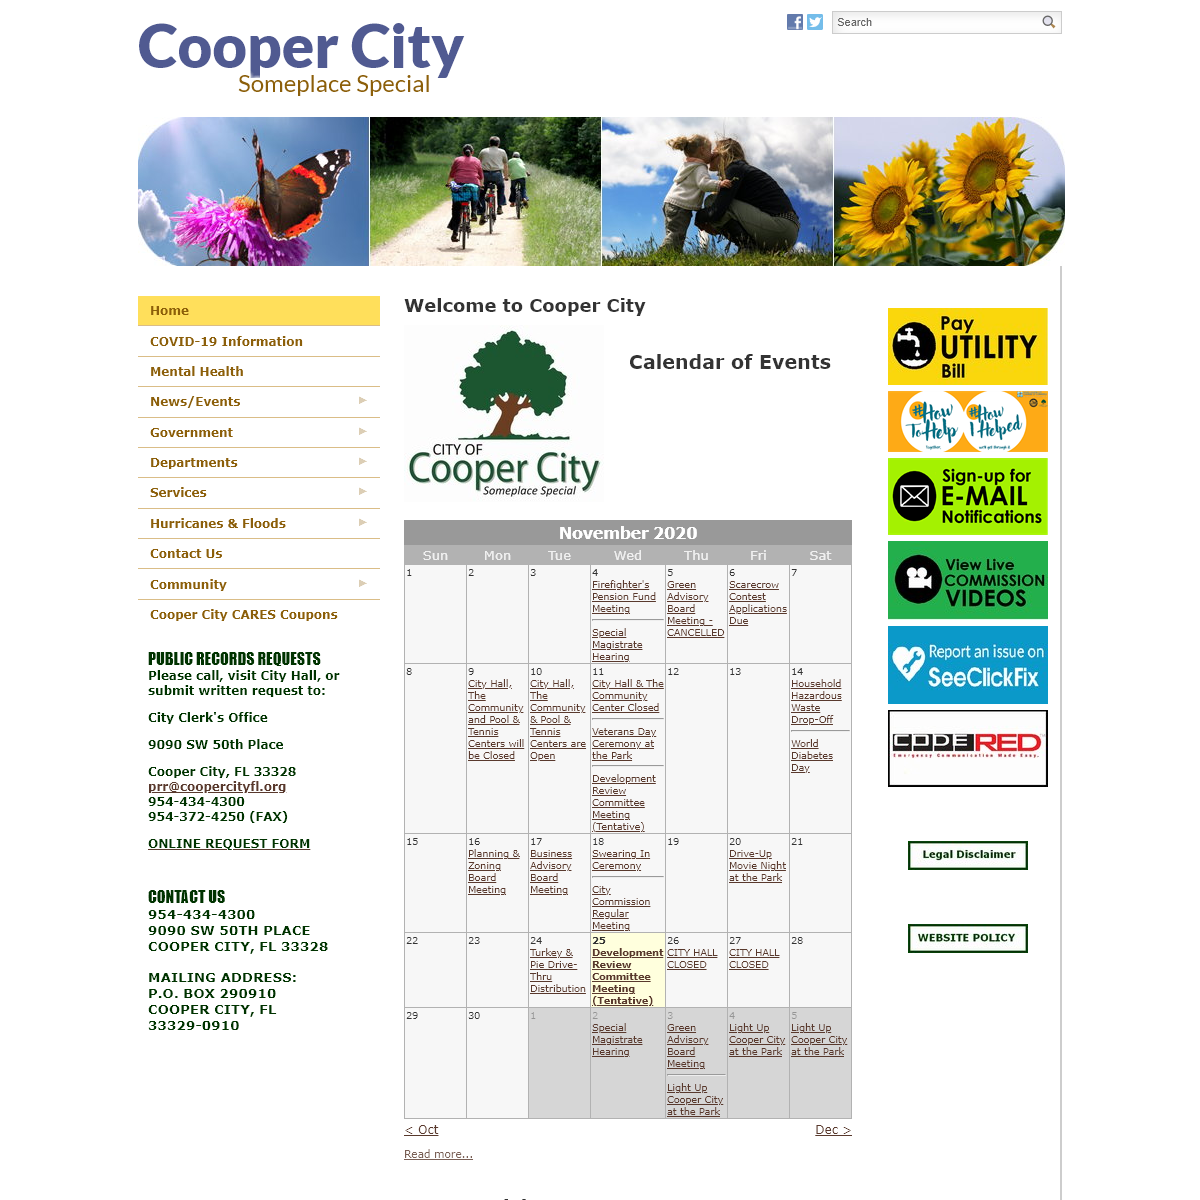 A complete backup of coopercityfl.org